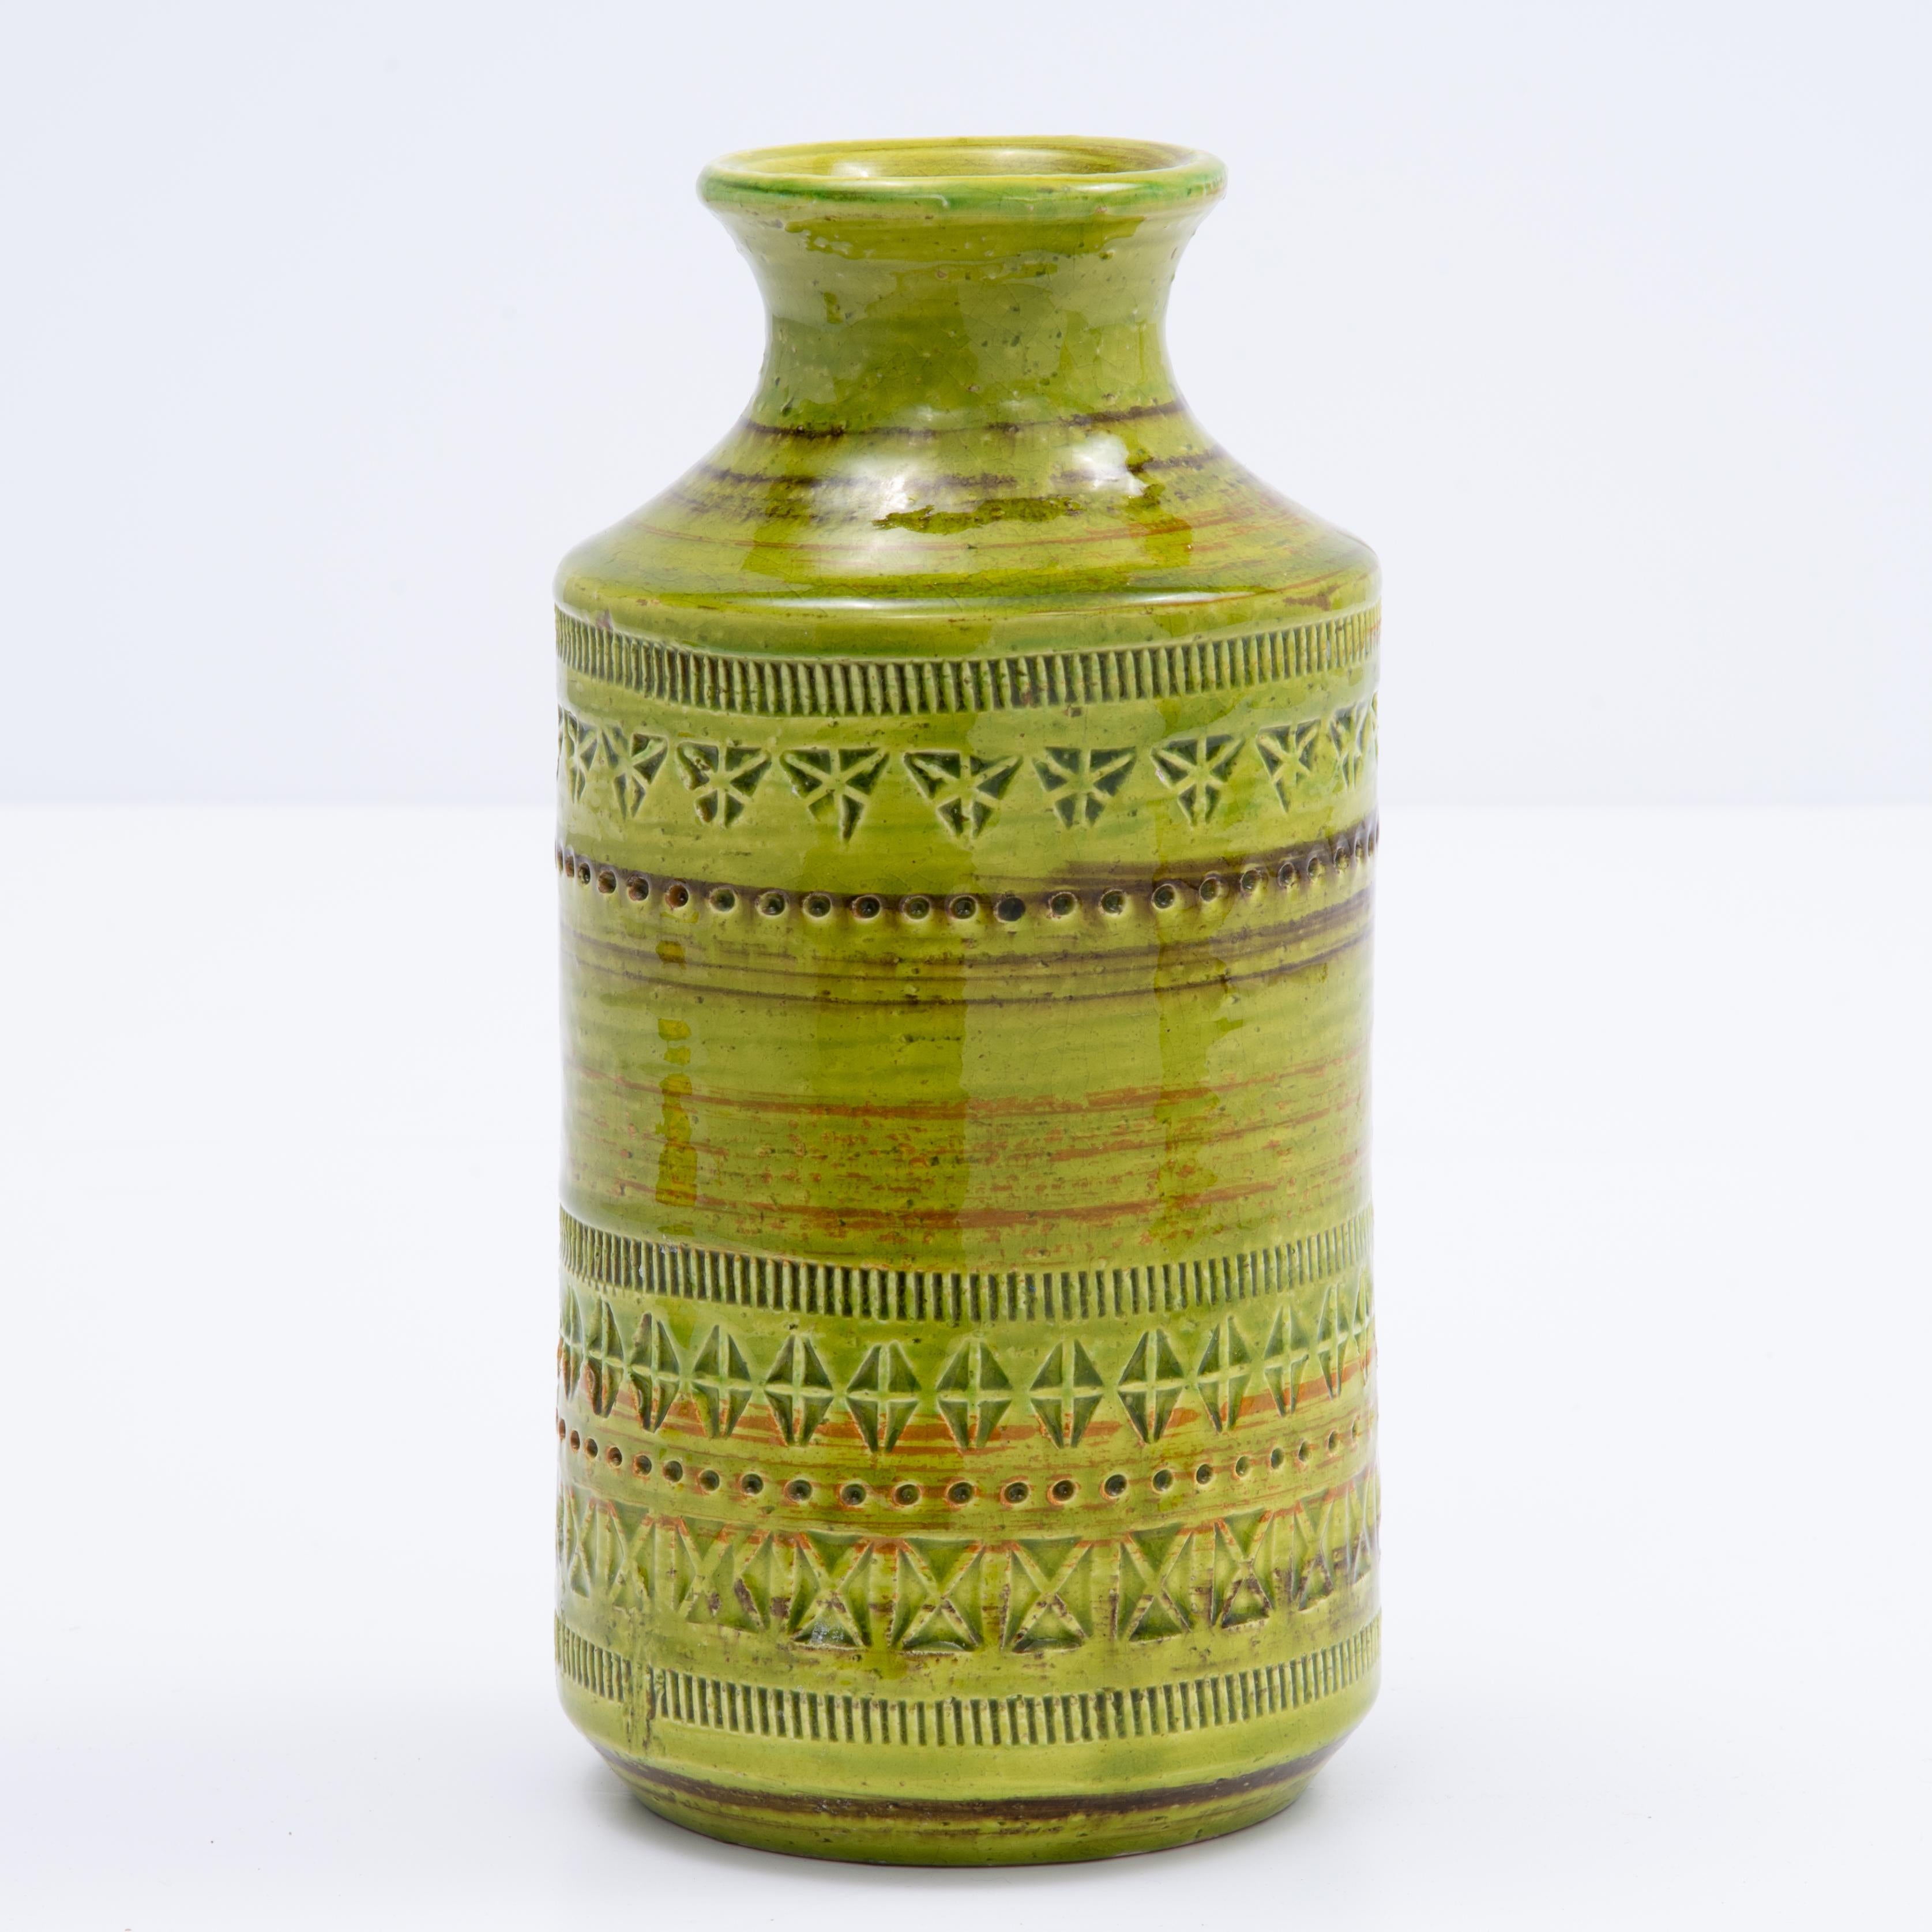 A fantastic  Aldo Londi Bitossi Italy vase imported by Rosenthal Netter. Rare green color. Hand impressed and hand painted glazed vessel in chartreuse, lime green, earthen brown and orange highlights. Original Rosenthal Netter sticker...